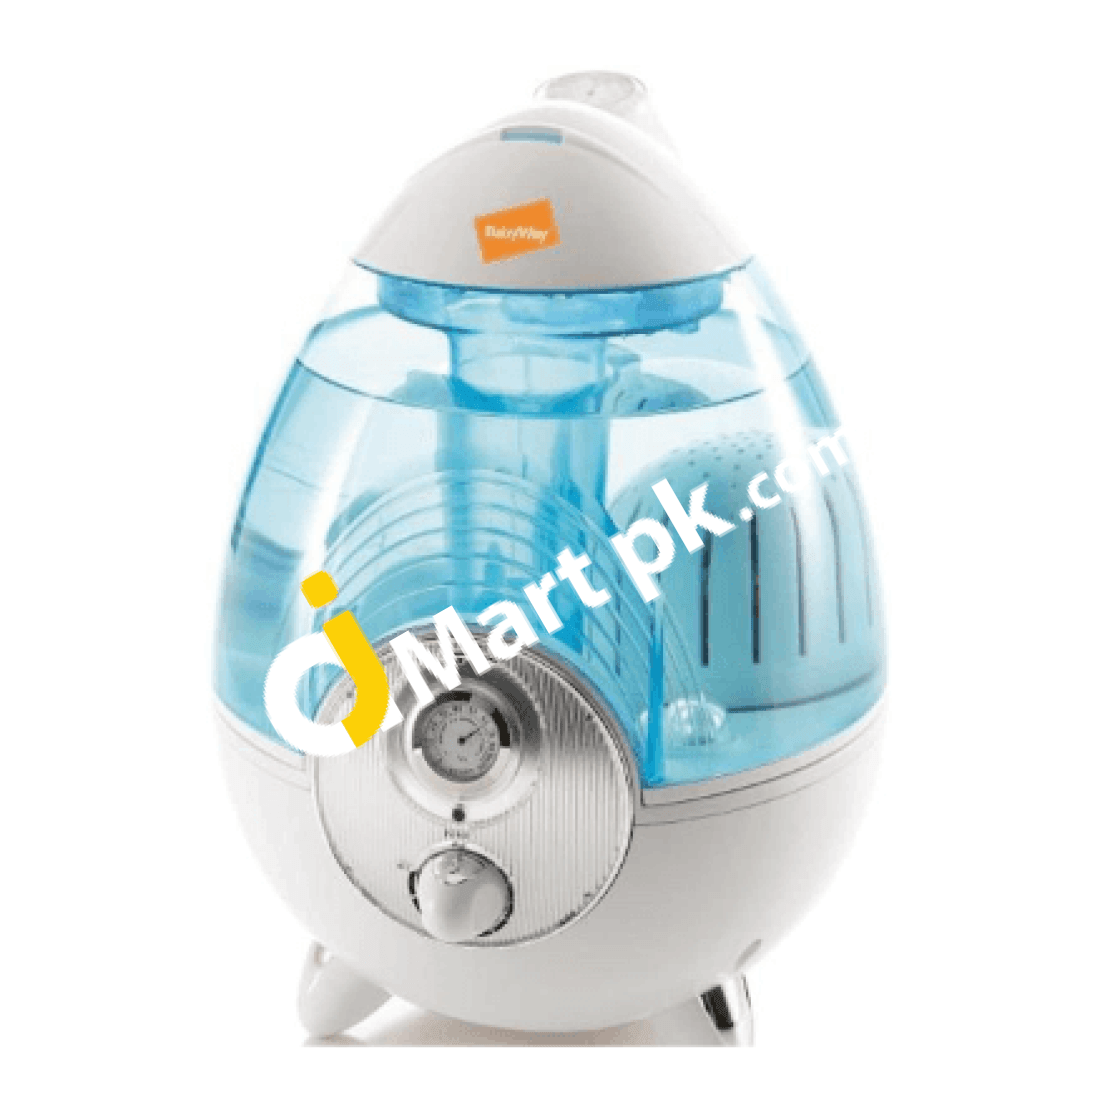 Babyway 5L Ultrasonic Humidifier - Imported From Uk